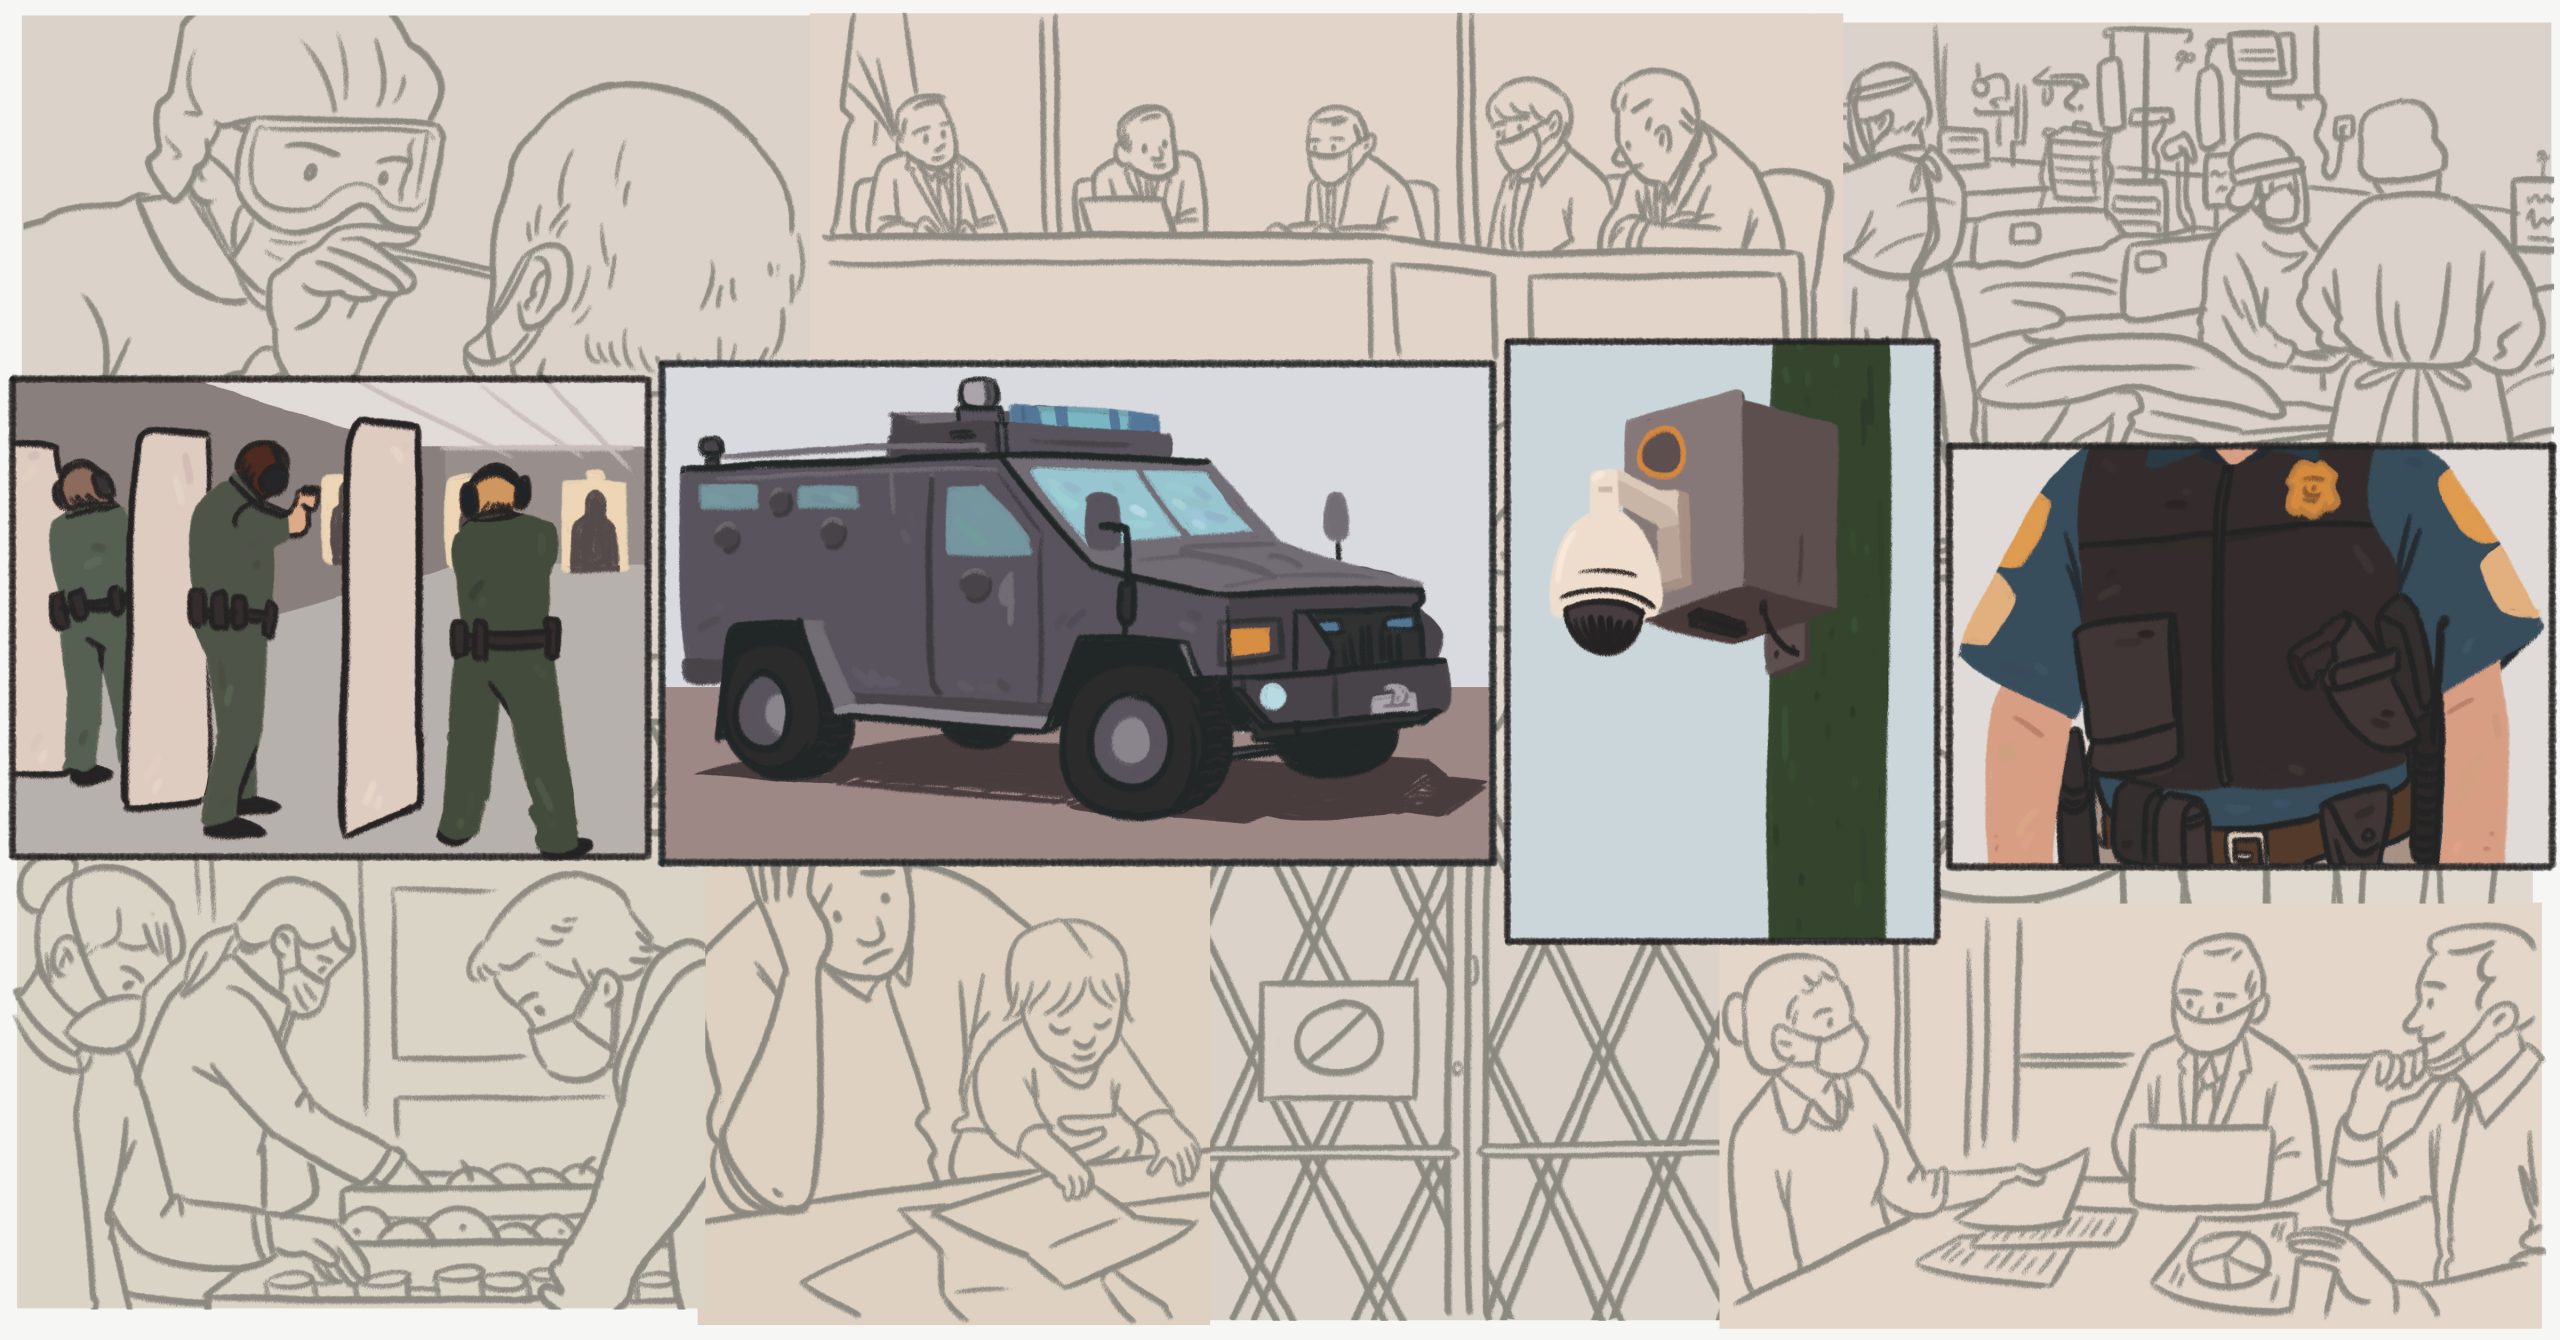 A collage illustration of families sitting at their dinner tables, as well as police officers at a firing range, a video surveillance camera and a police vest.